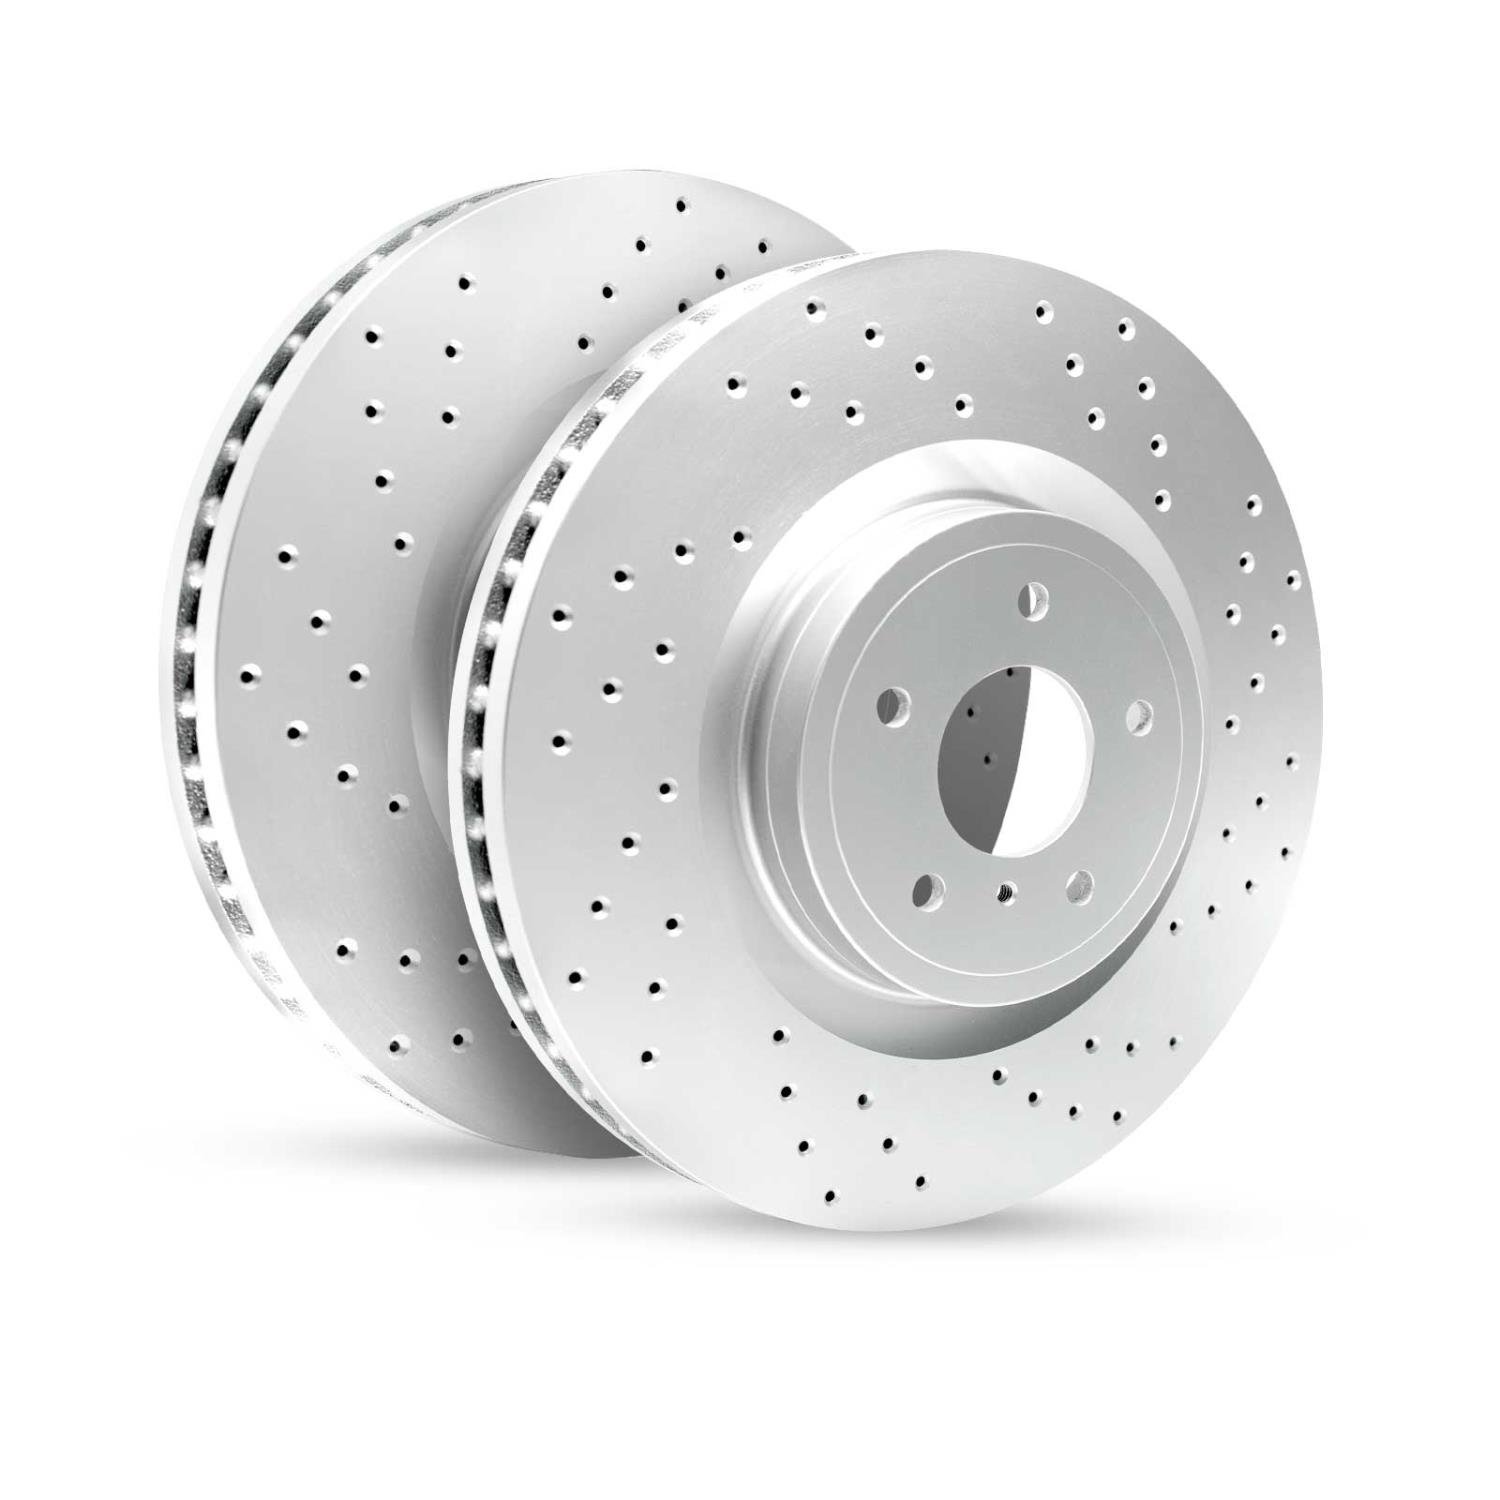 GEO-Carbon Drilled/Slotted Rotors, 2010-2019 BMW, Position: Rear